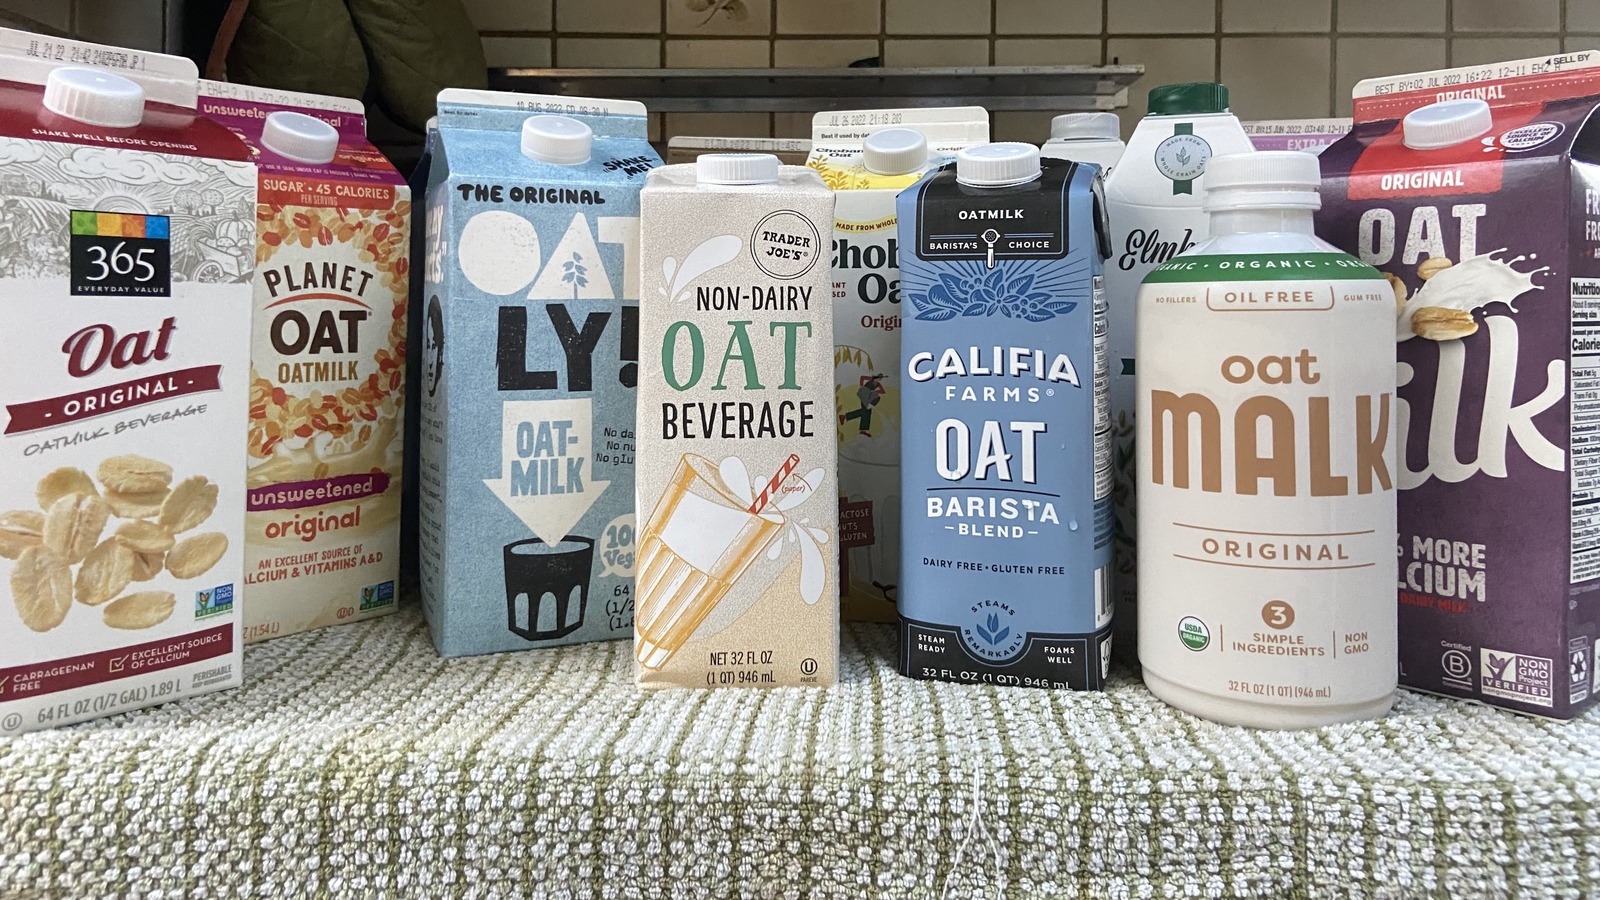 Greens Health Foods - Have you heard about the Oatly oat milk